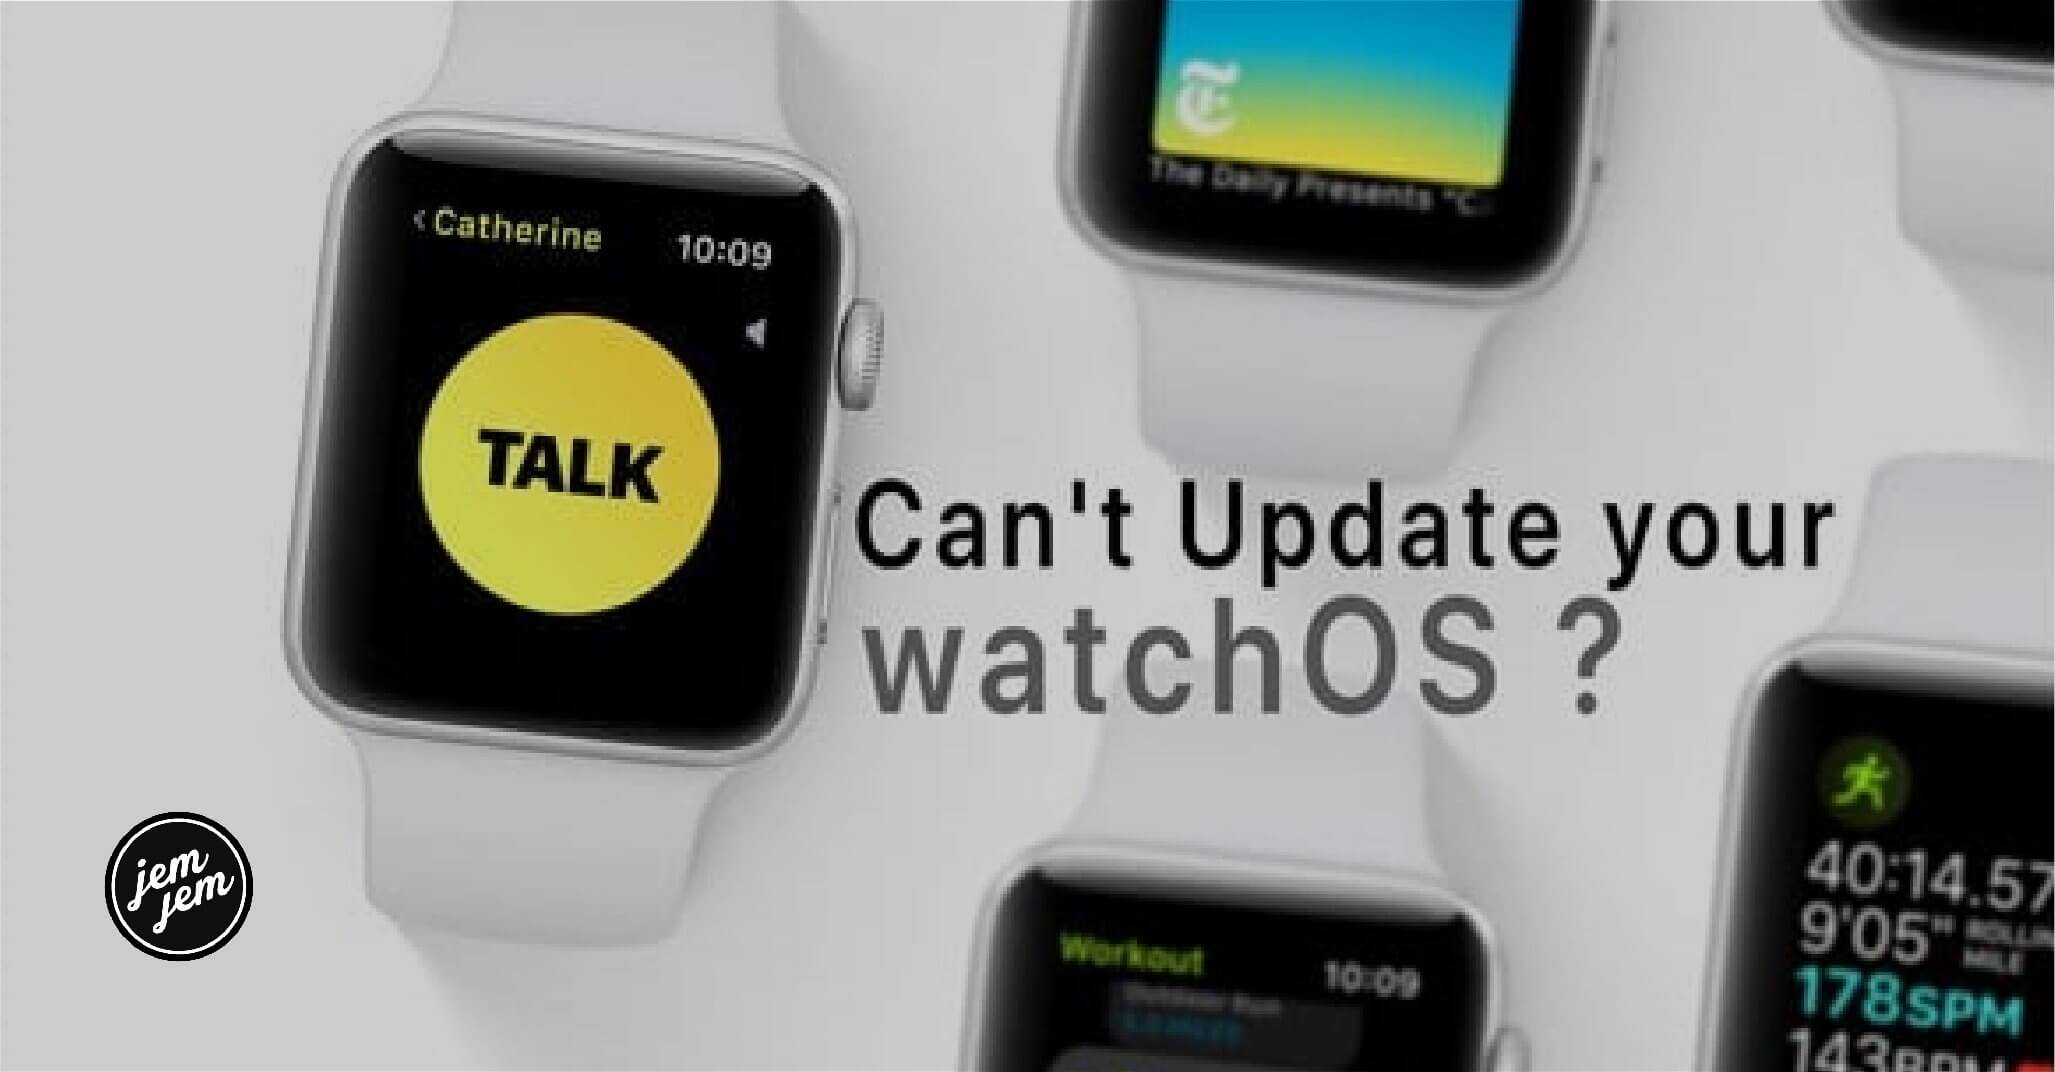 Can't update watchOS? How to troubleshoot common problems